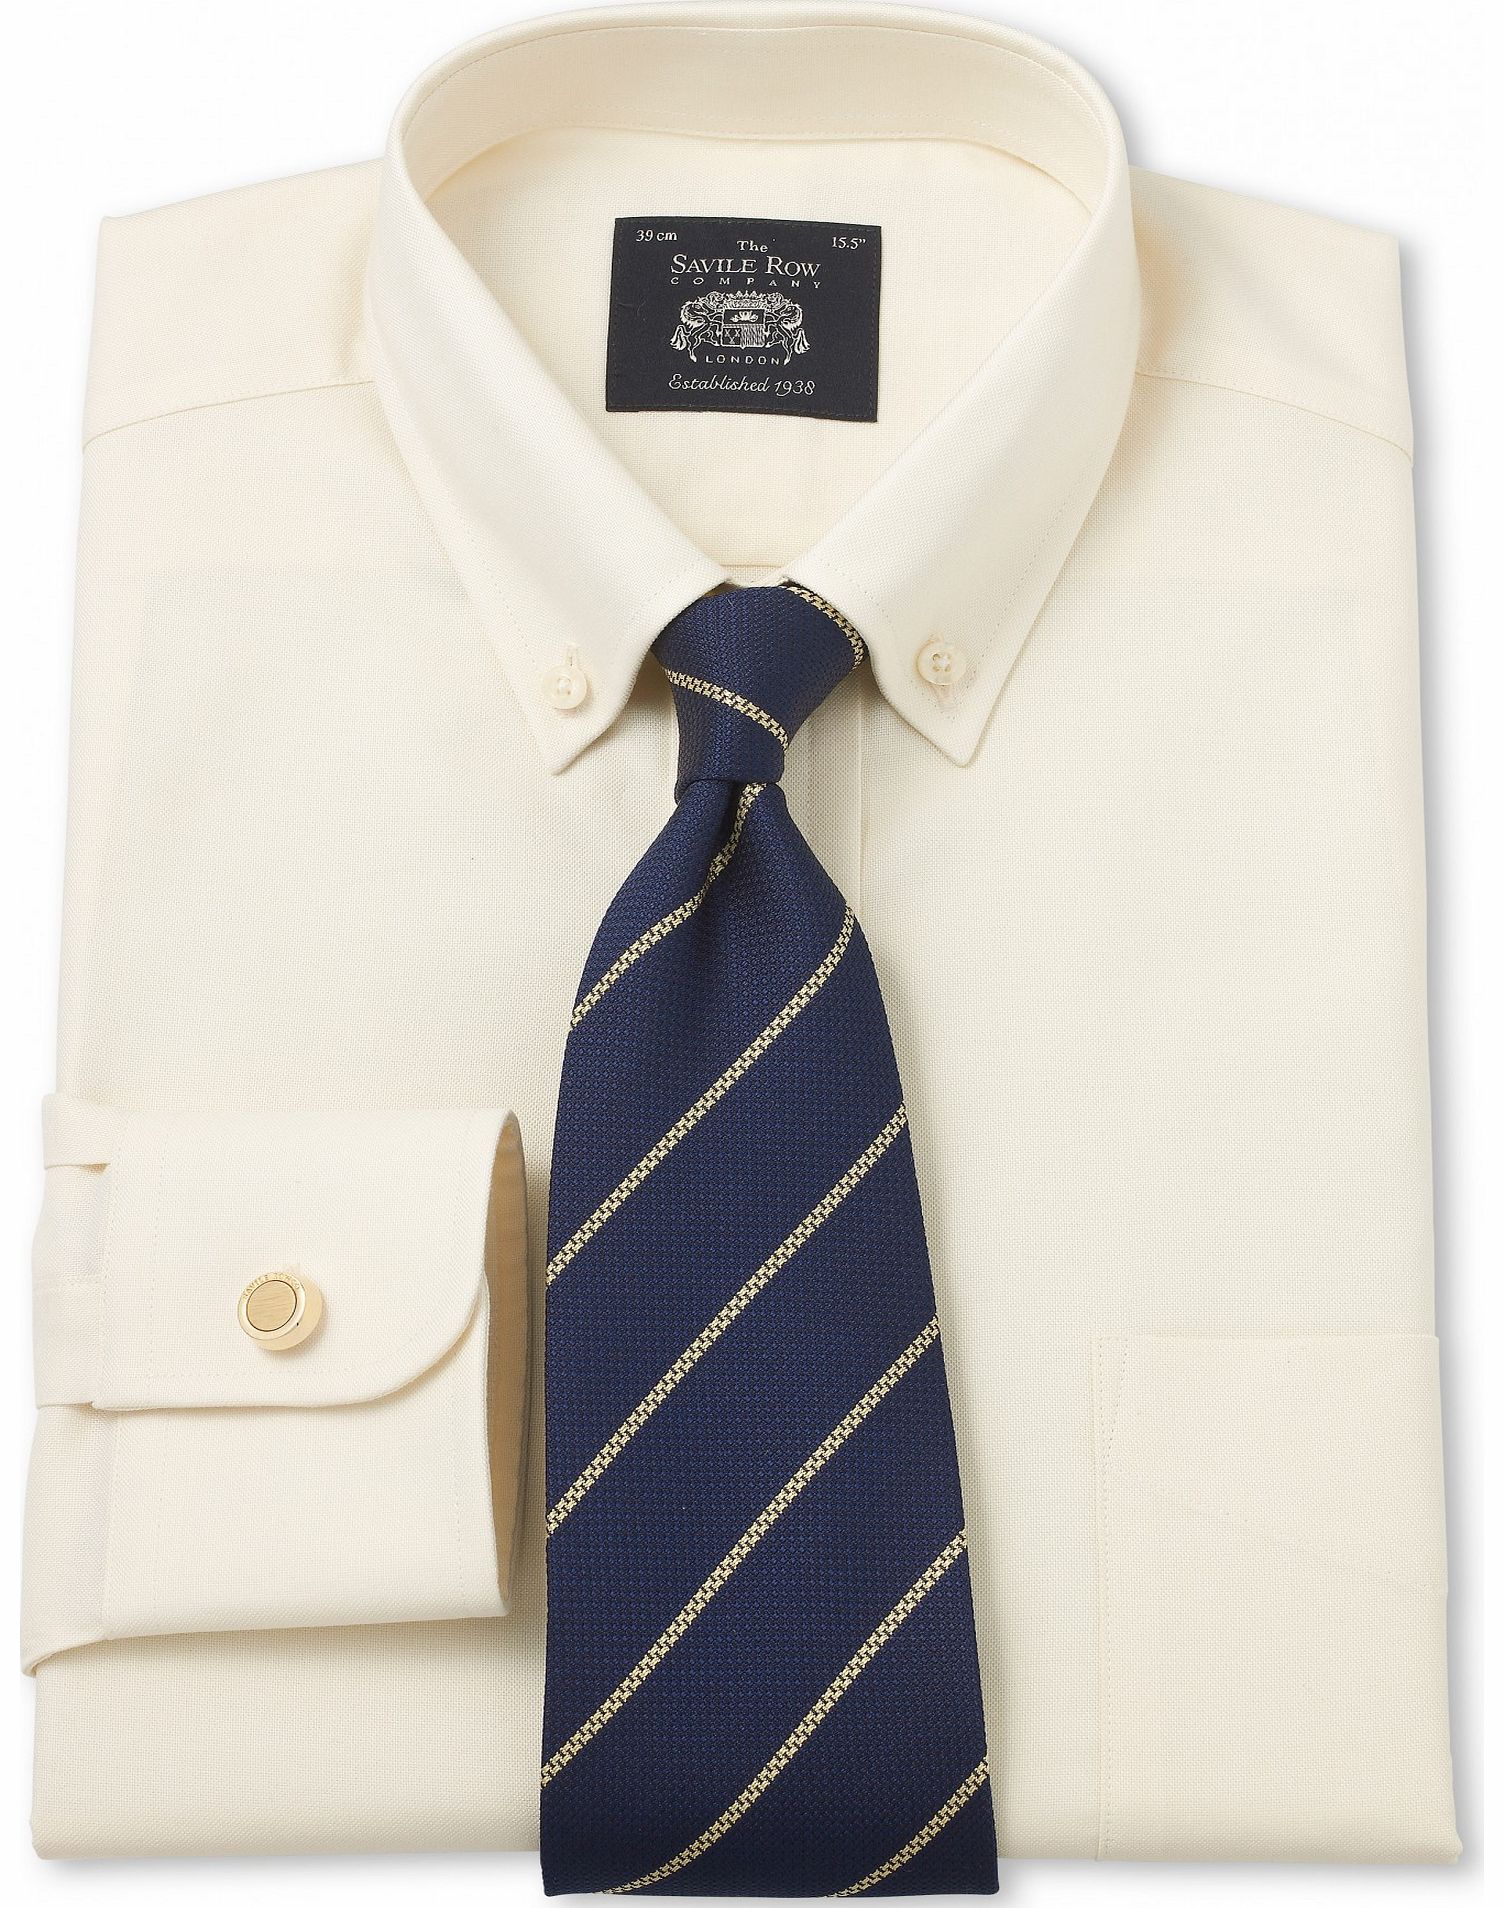 Savile Row Company Cream Pinpoint Classic Fit Shirt 16`` Lengthened